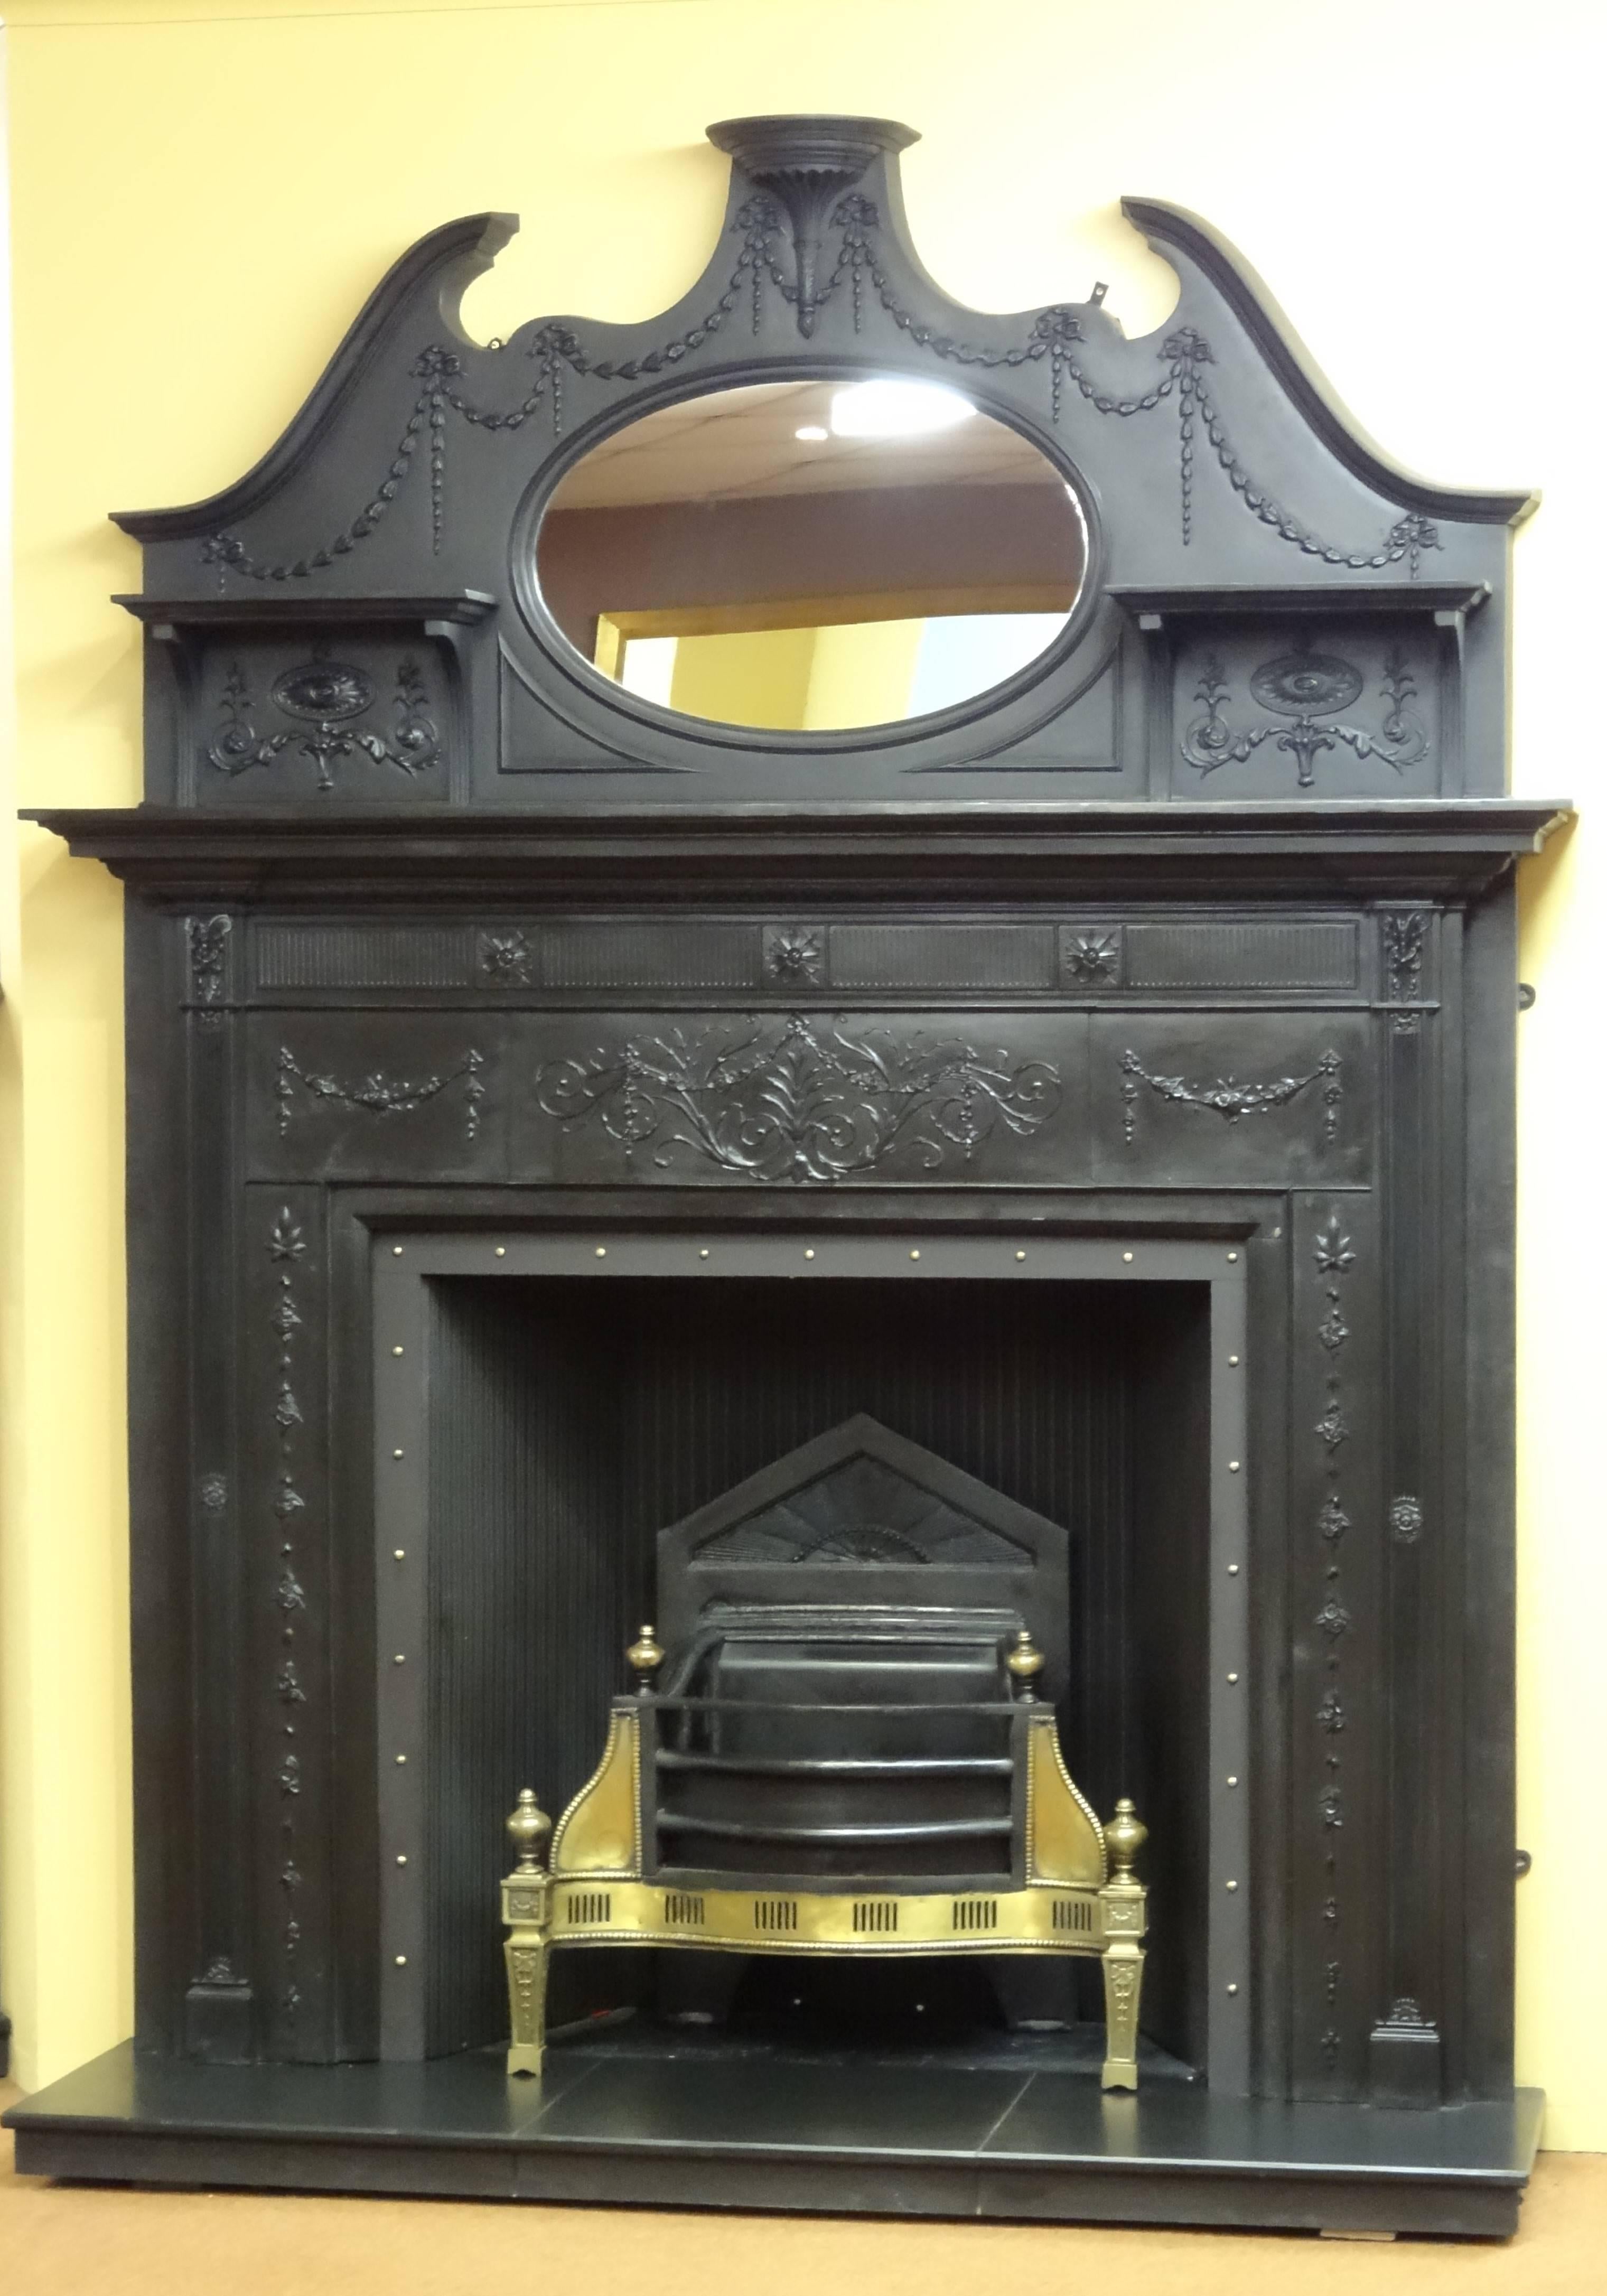 19th century Victorian cast iron fireplace surround and matching overmantel mirror. This fireplace is complimented with 20th century cast iron reeded panelled fireback and brass studded metal trim. This fireplace was reclaimed from a Victorian